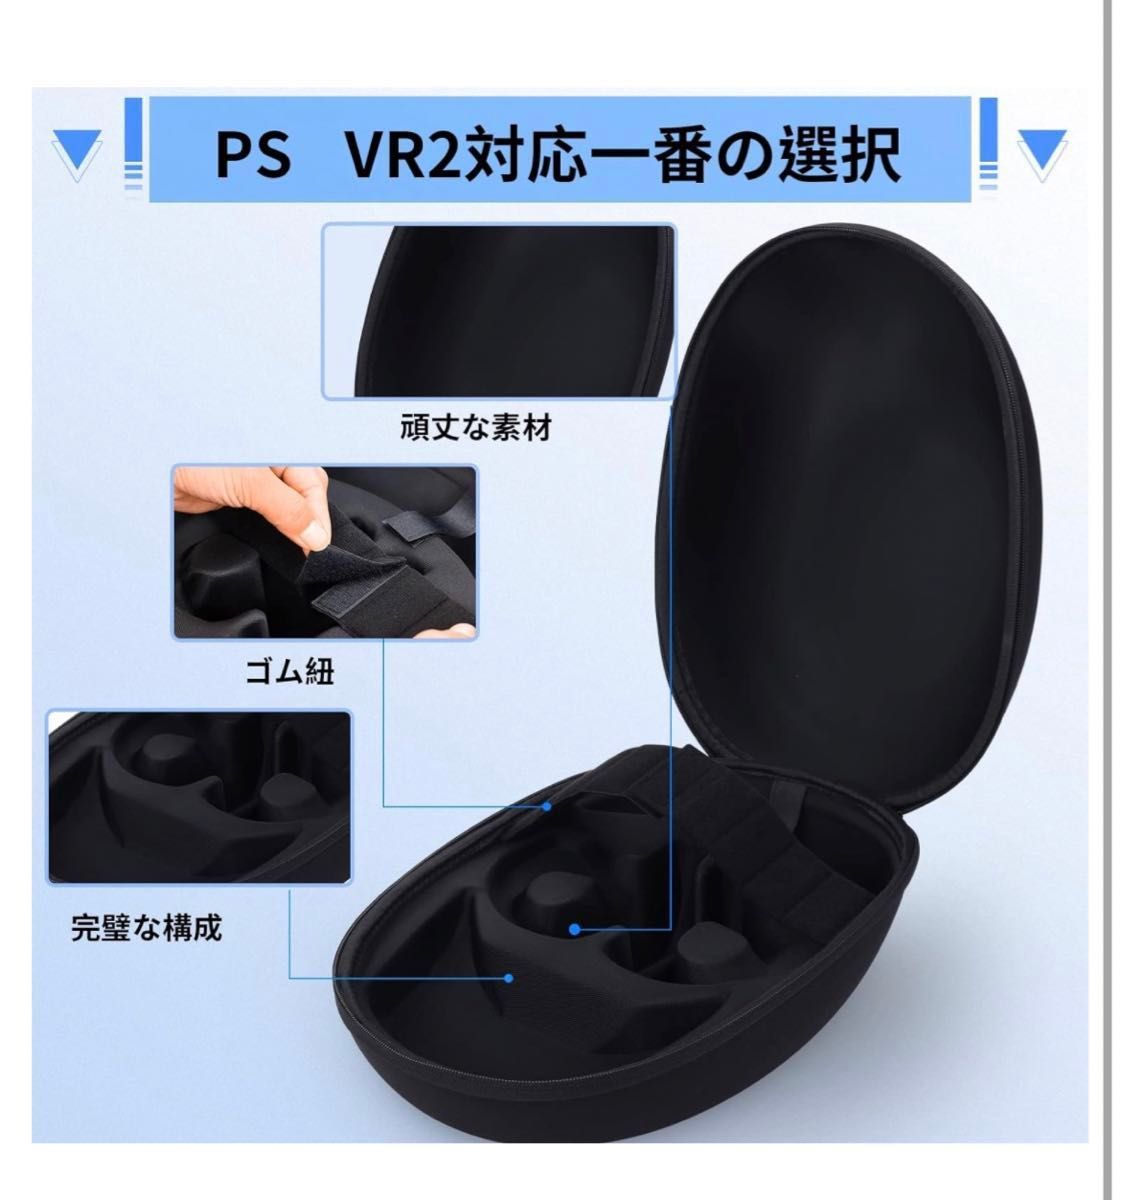 For PS VR2 収納バッグ 保護カバー キャリングバッグ 収納ケース 多機能対応 Play*Station VRデバイス収納